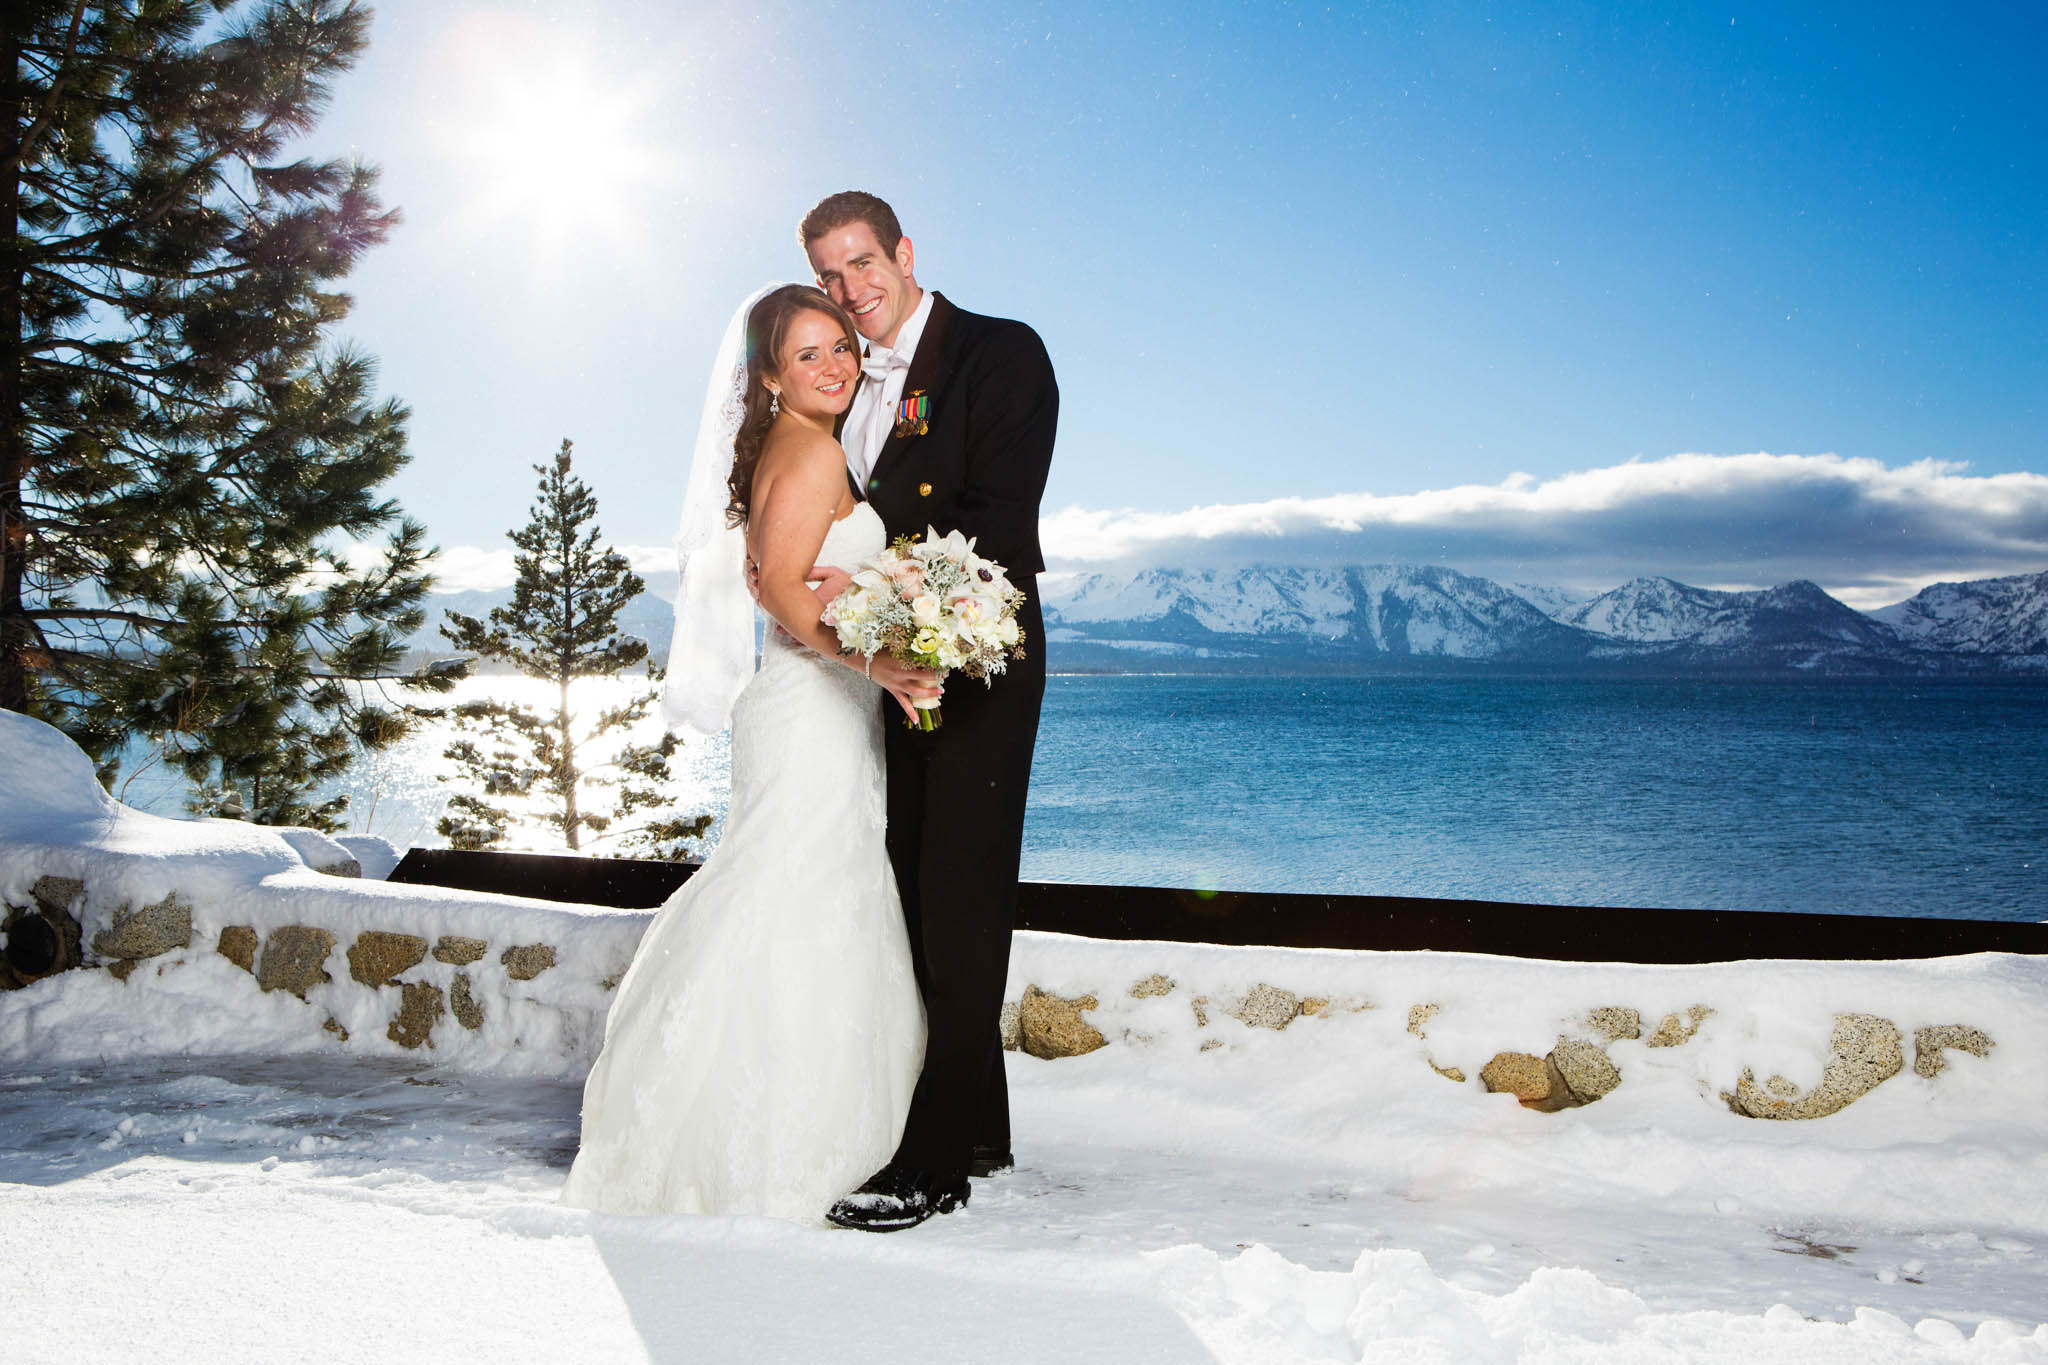 bride and groom looking at camera, lake view, snow, white bouquet